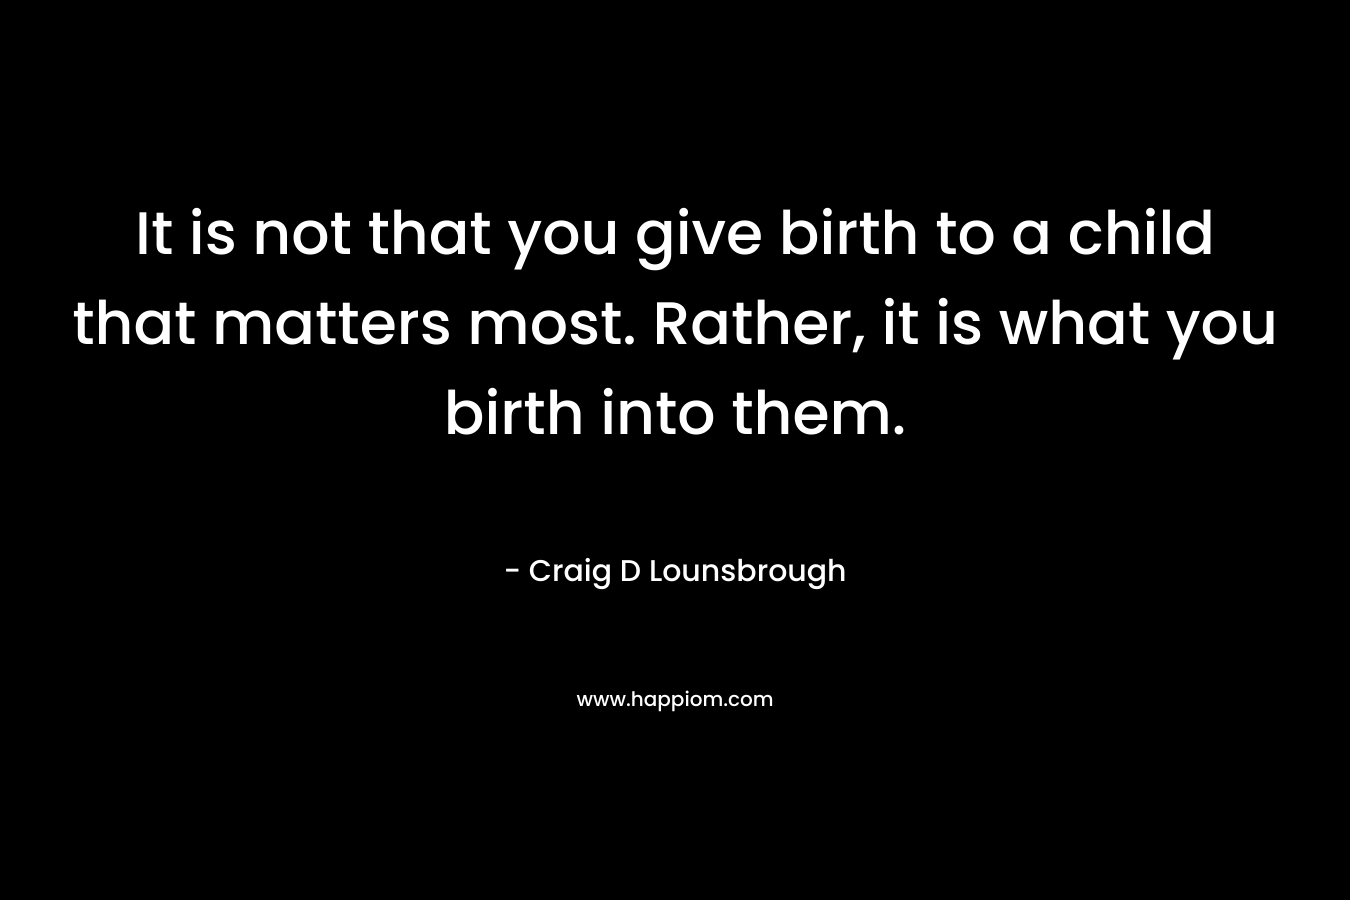 It is not that you give birth to a child that matters most. Rather, it is what you birth into them.